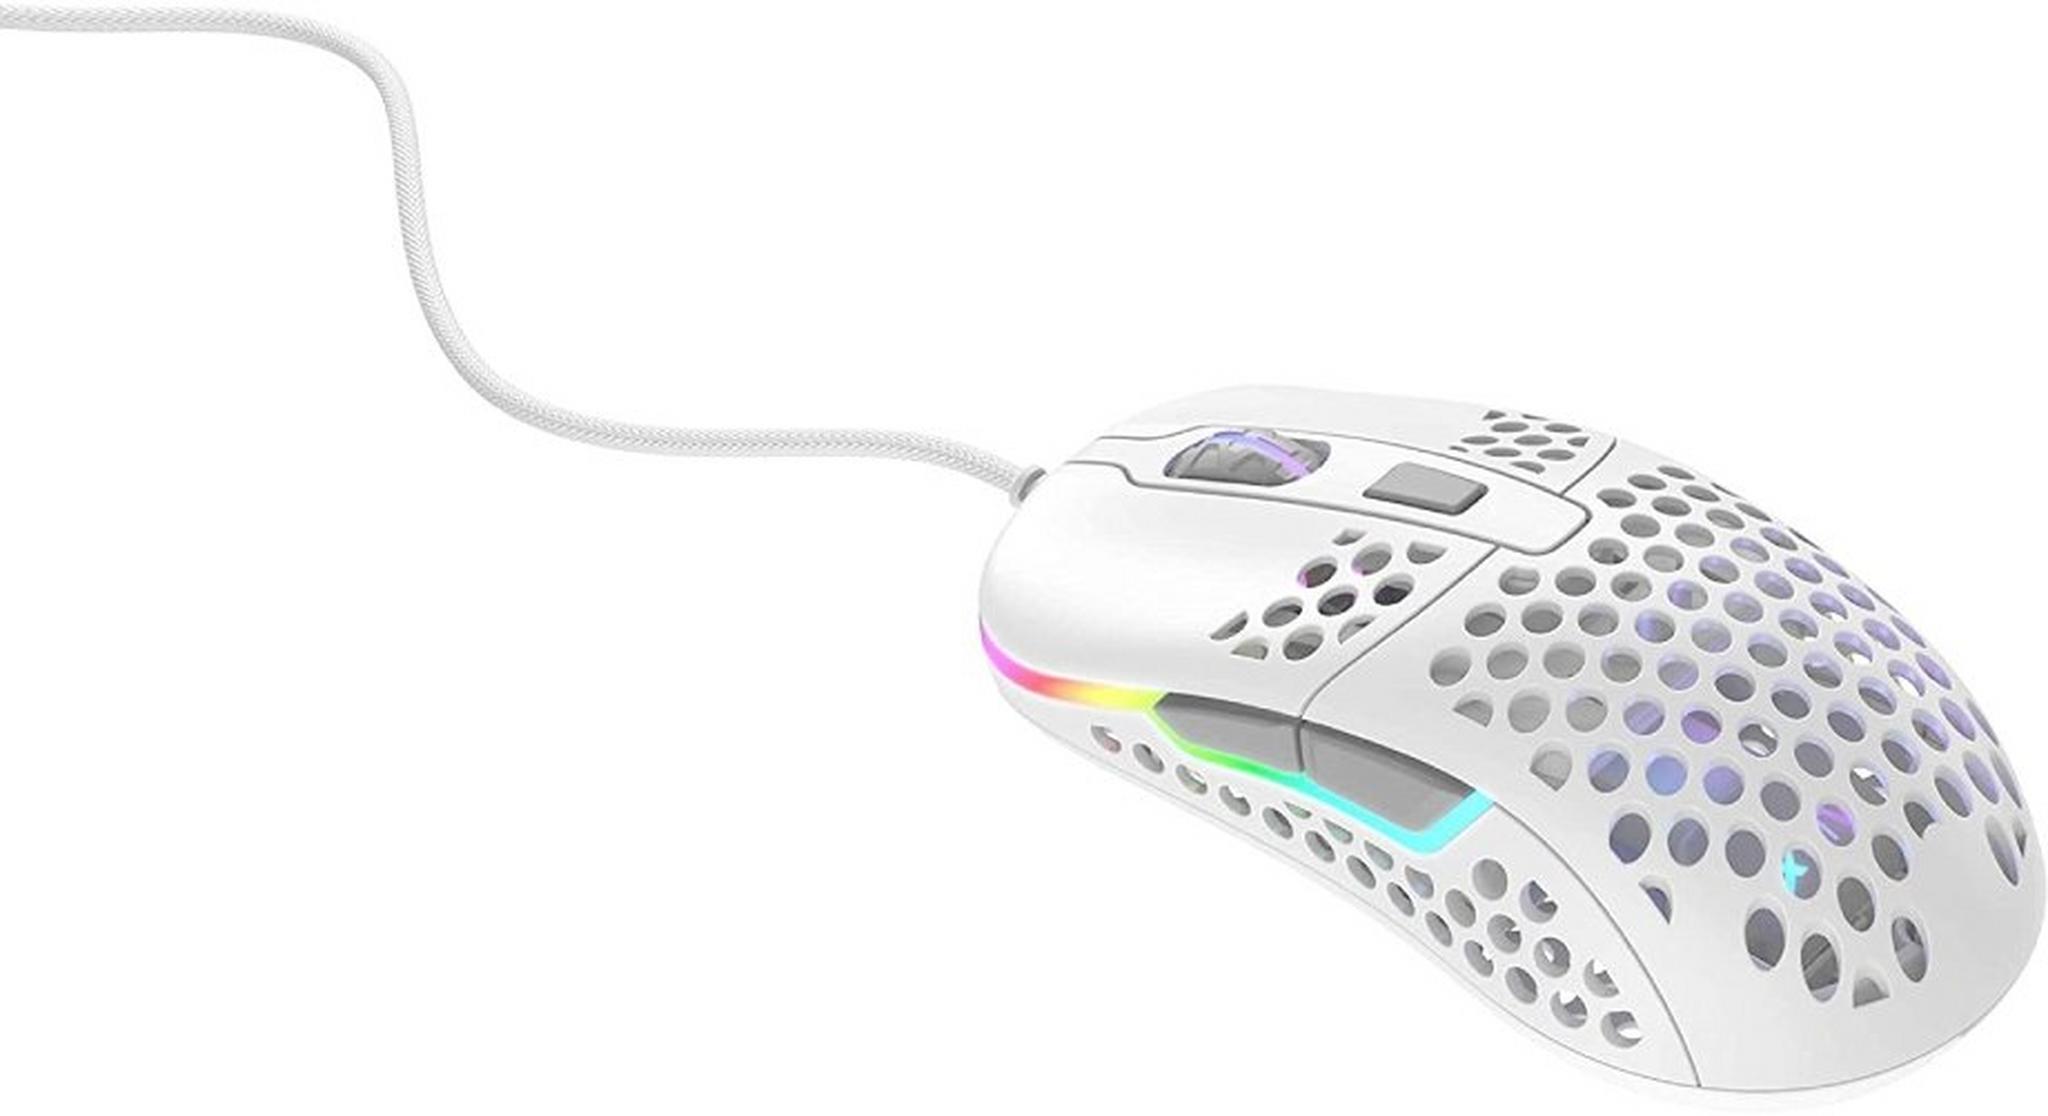 Xtrfy M42 RGB Wired Mouse - White